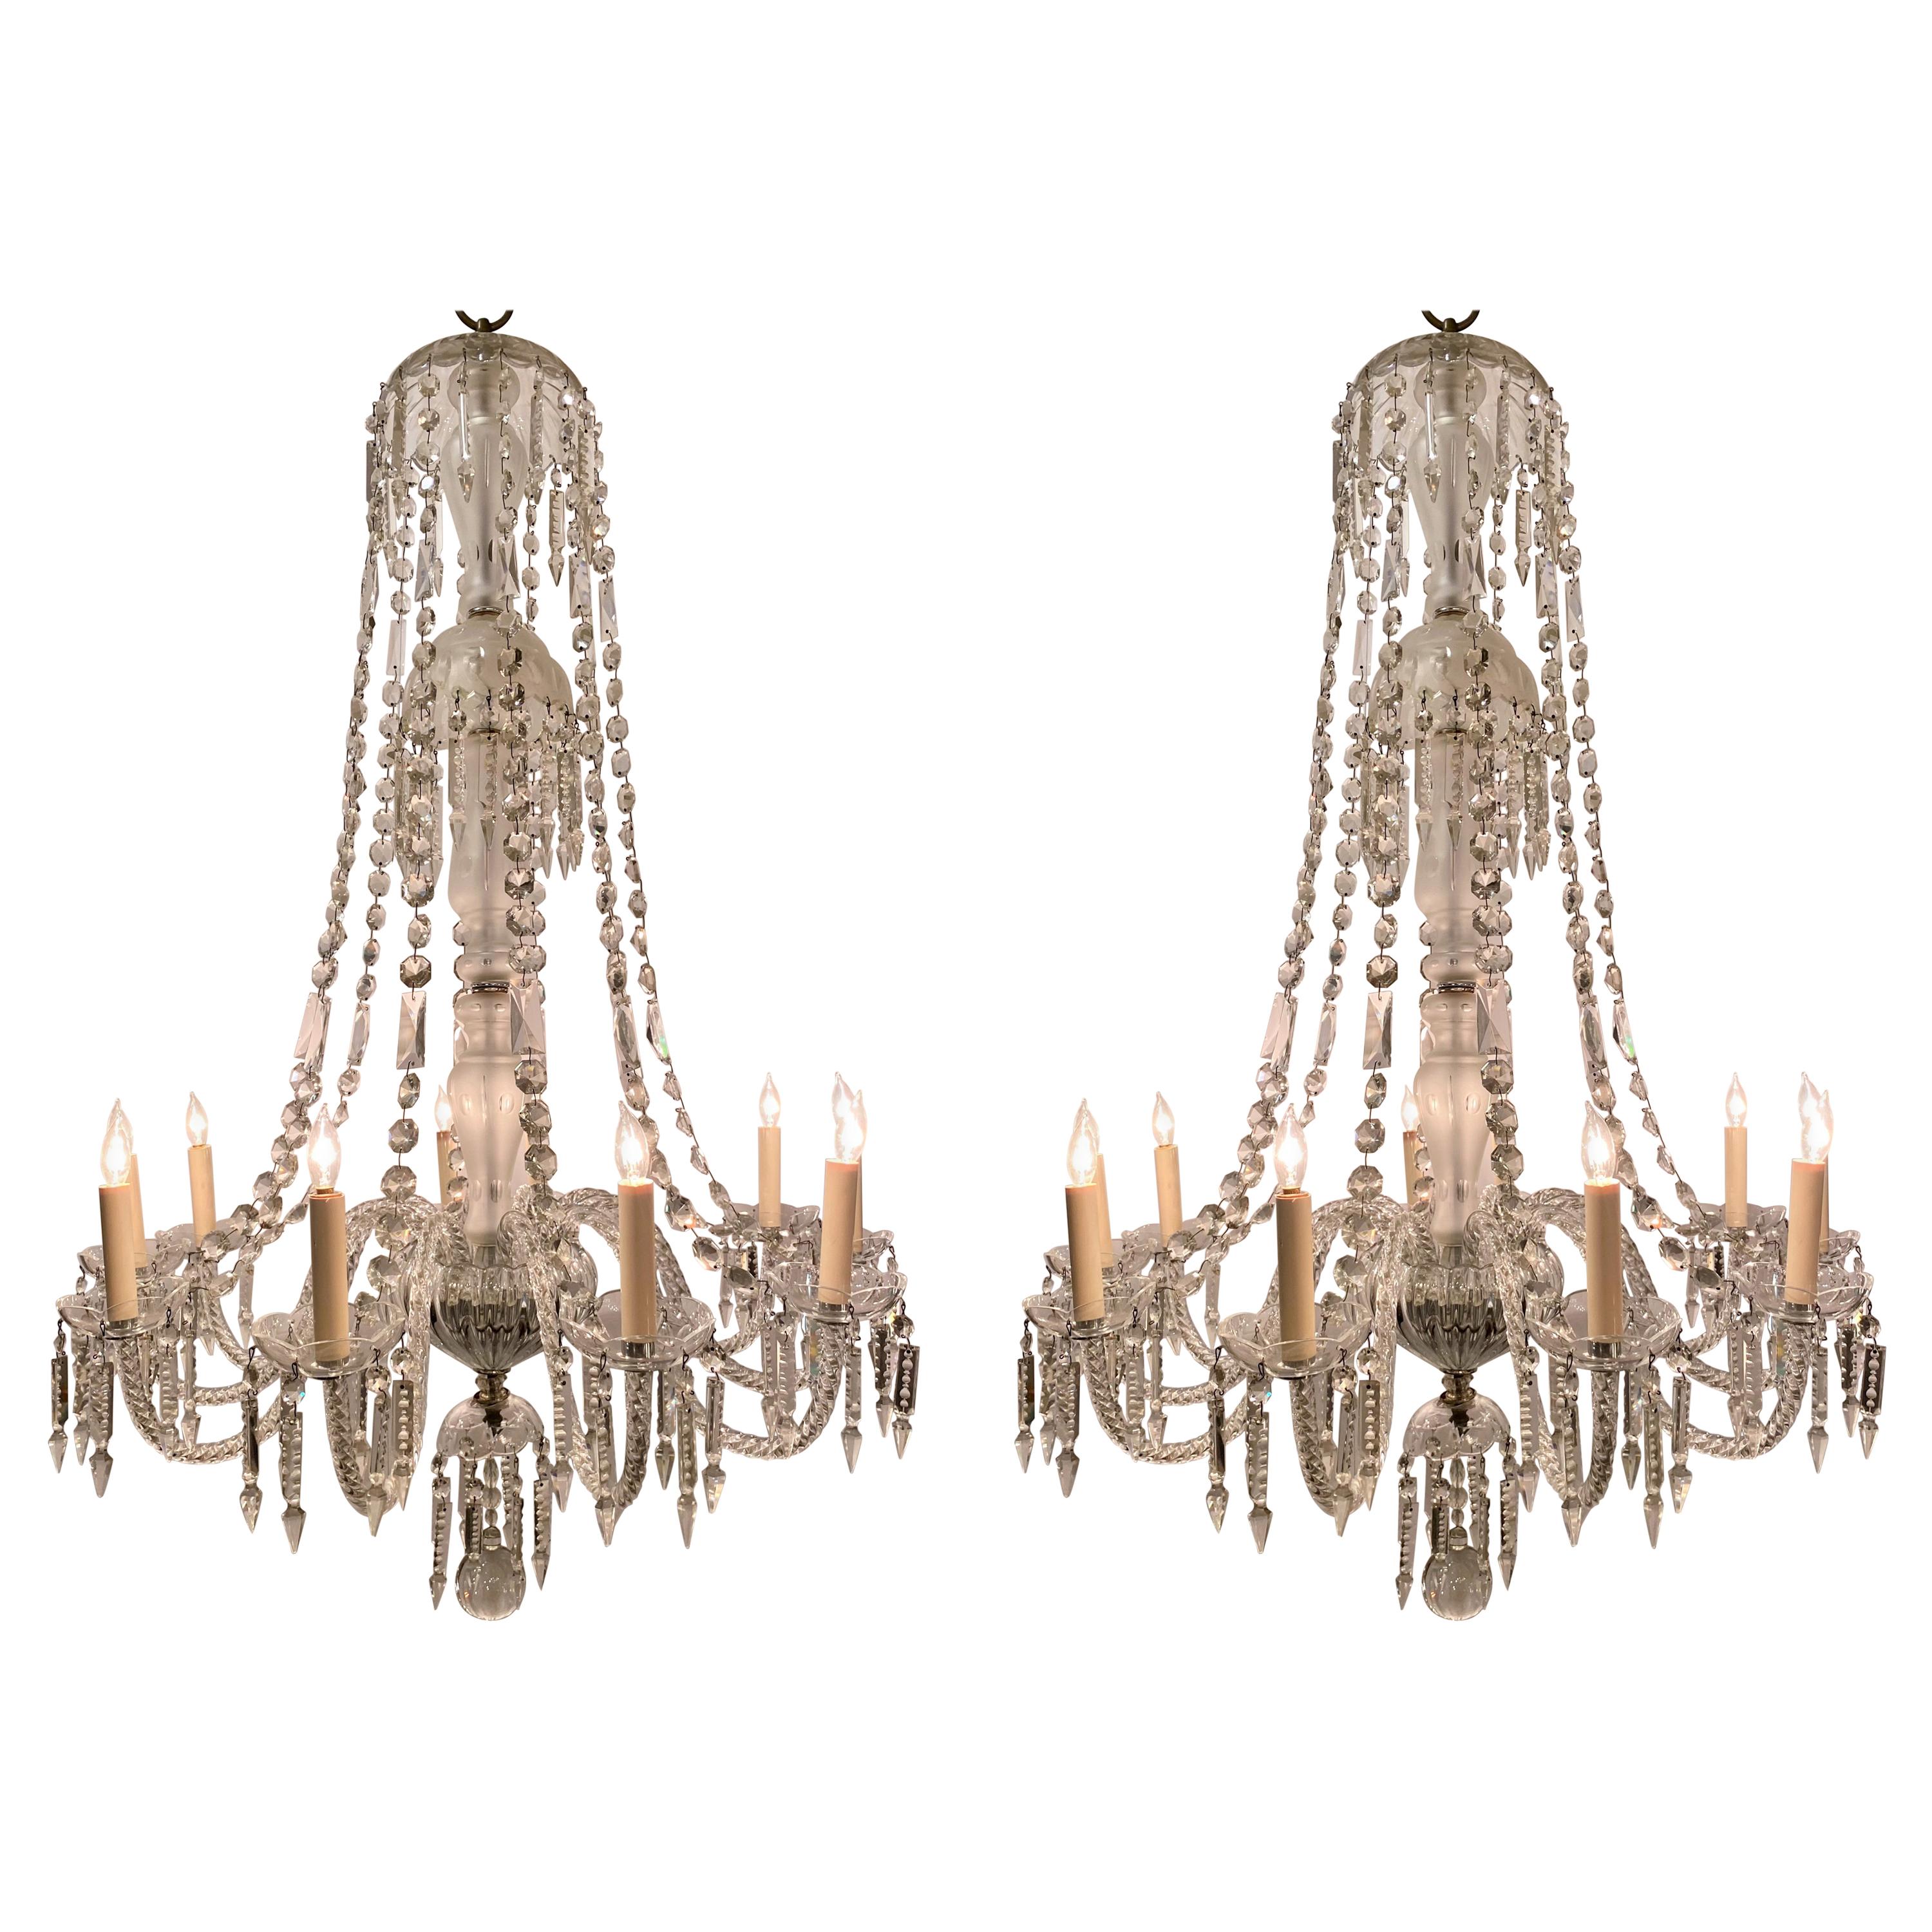 Pair Antique Early 19th Century English Crystal Chandeliers